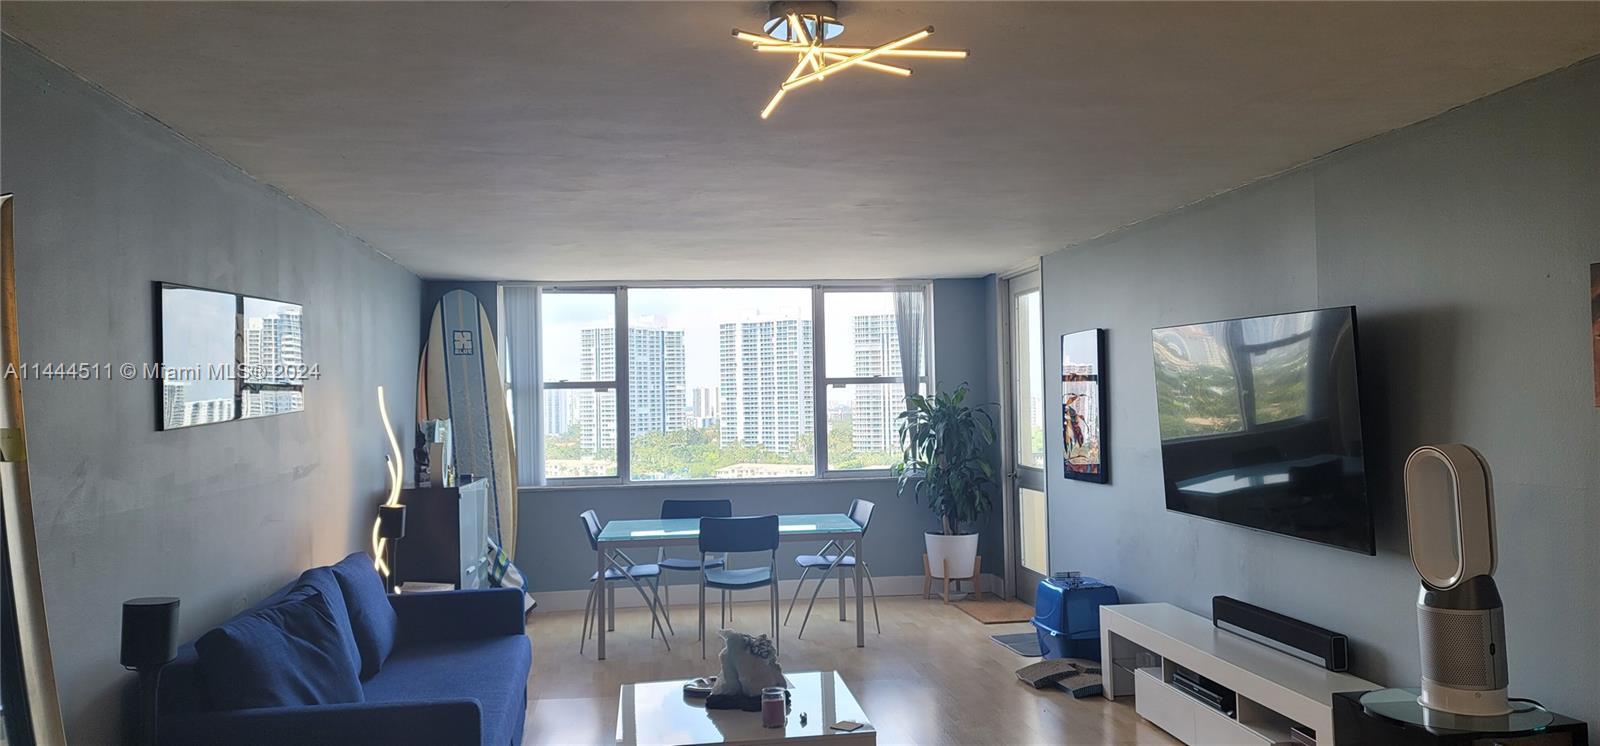 * Best value for 1bed/1bath on the beach in Hallandale Beach!!
* Resort style condominium on the sa